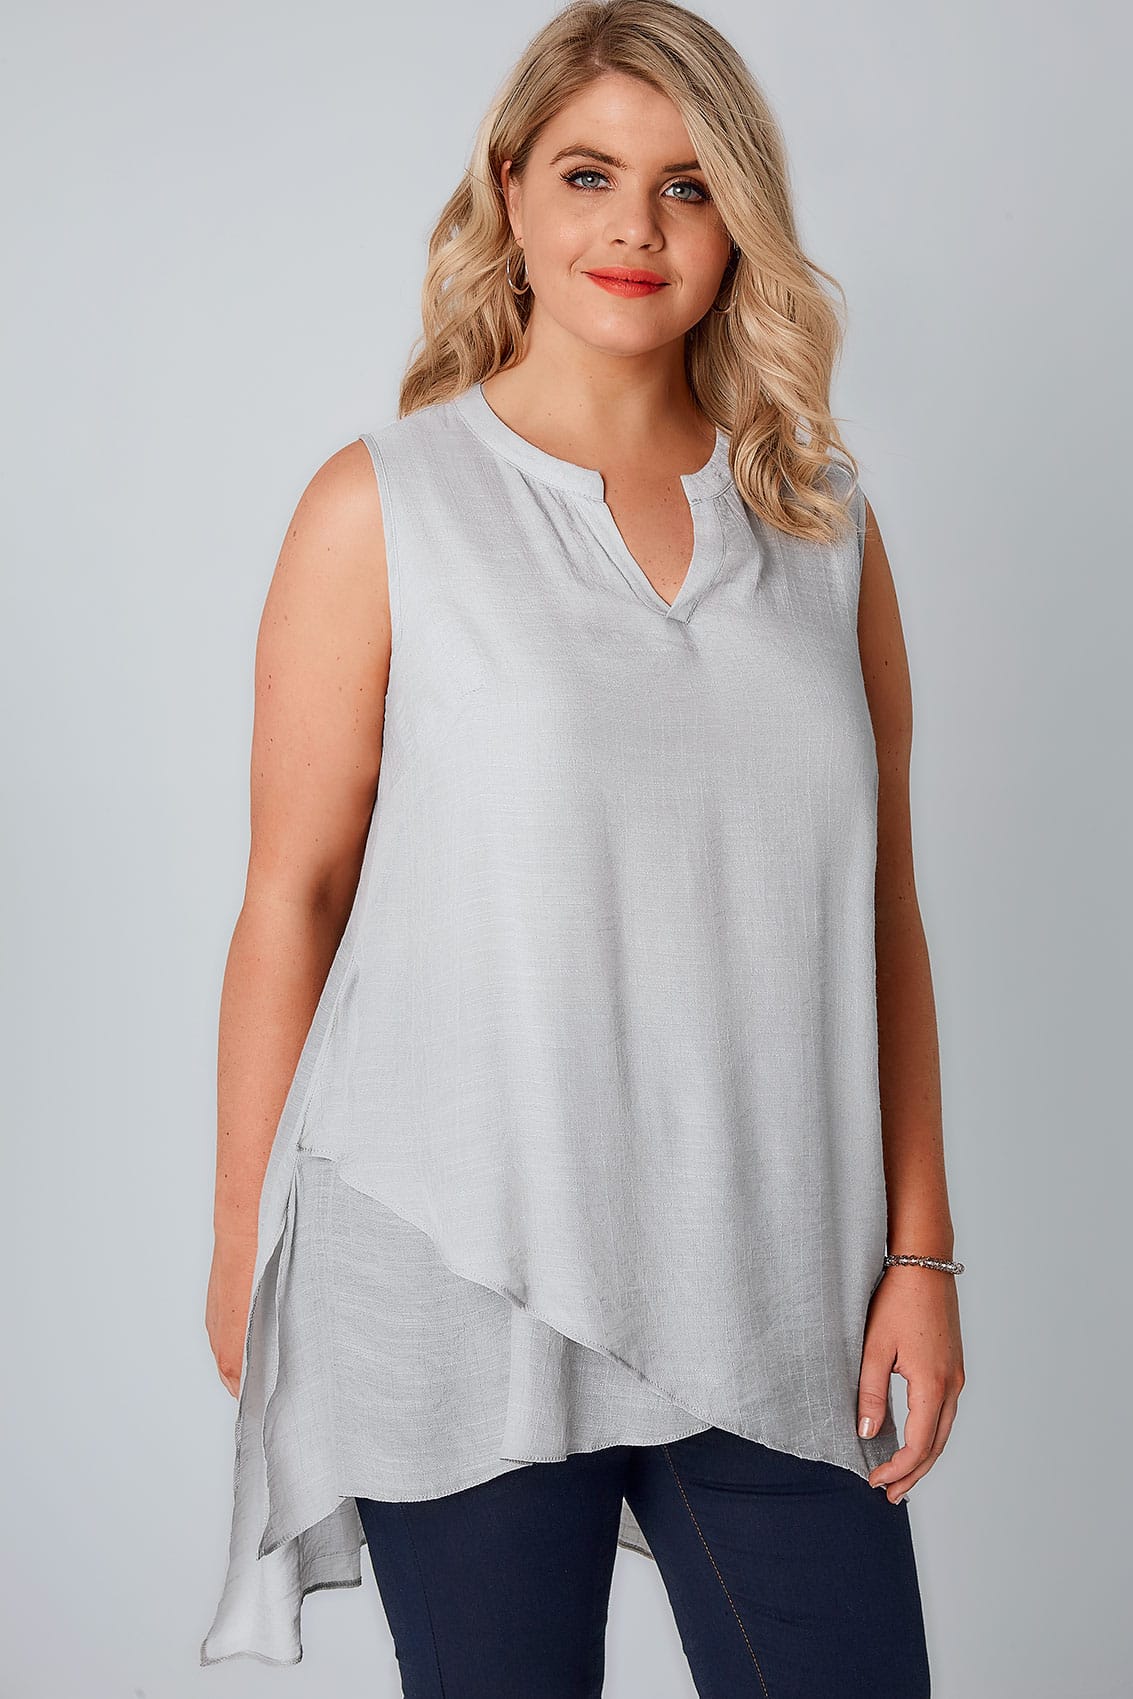 Grey Sleeveless Top With Layered Front, Plus size 16 to 36